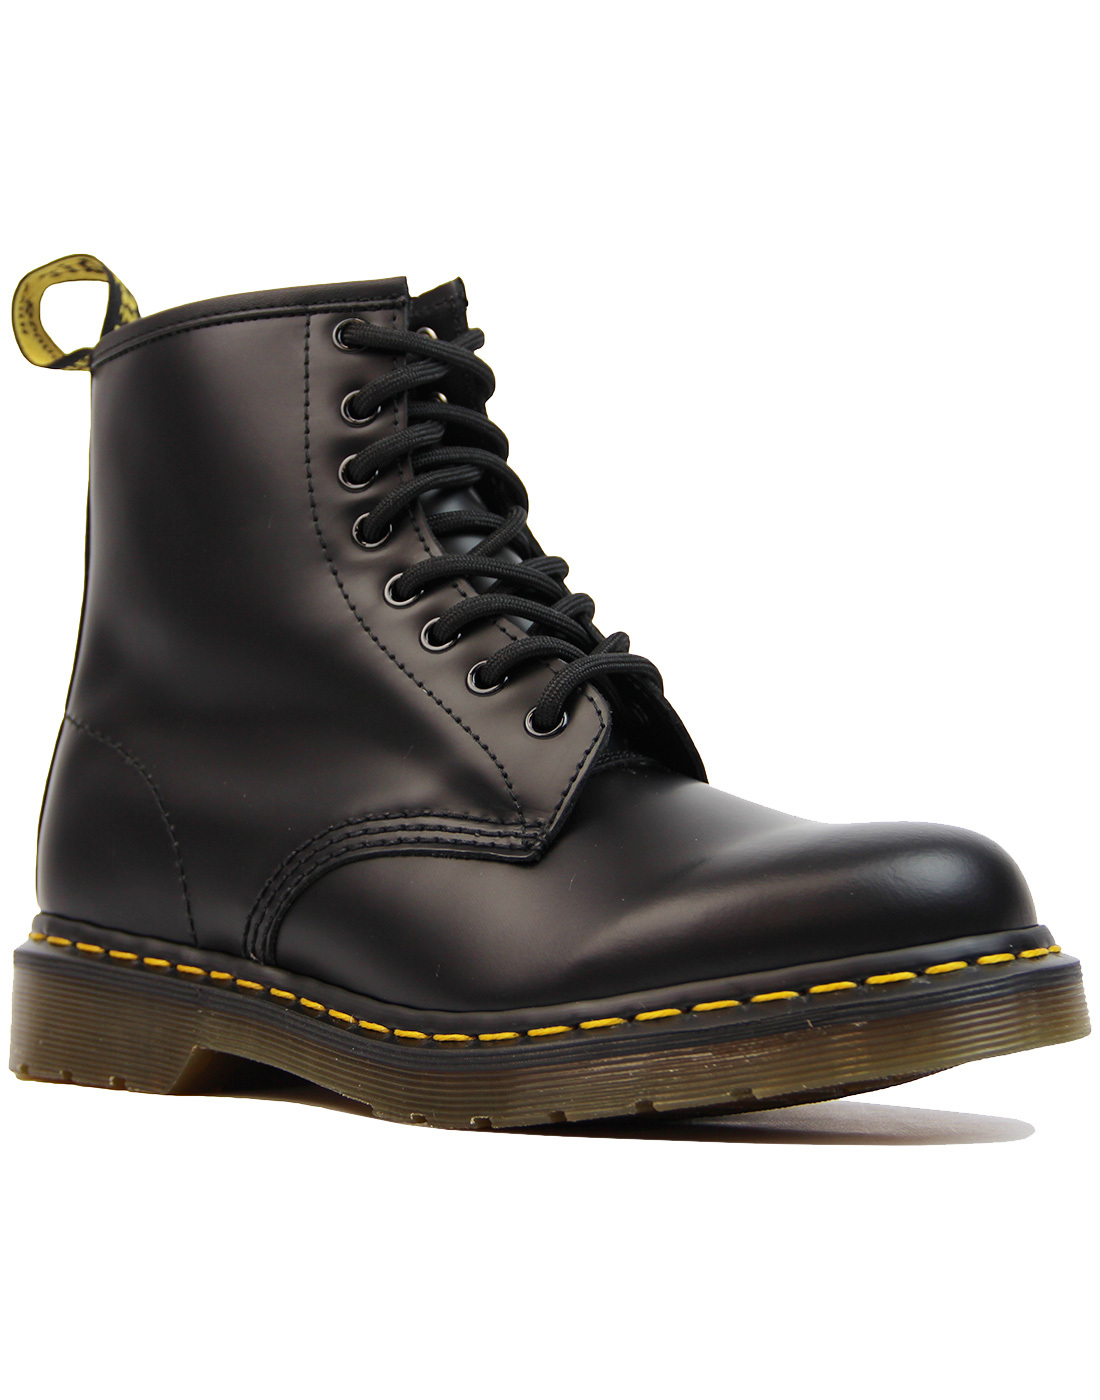 1460 DR MARTENS Womens Mod Black Leather Boots